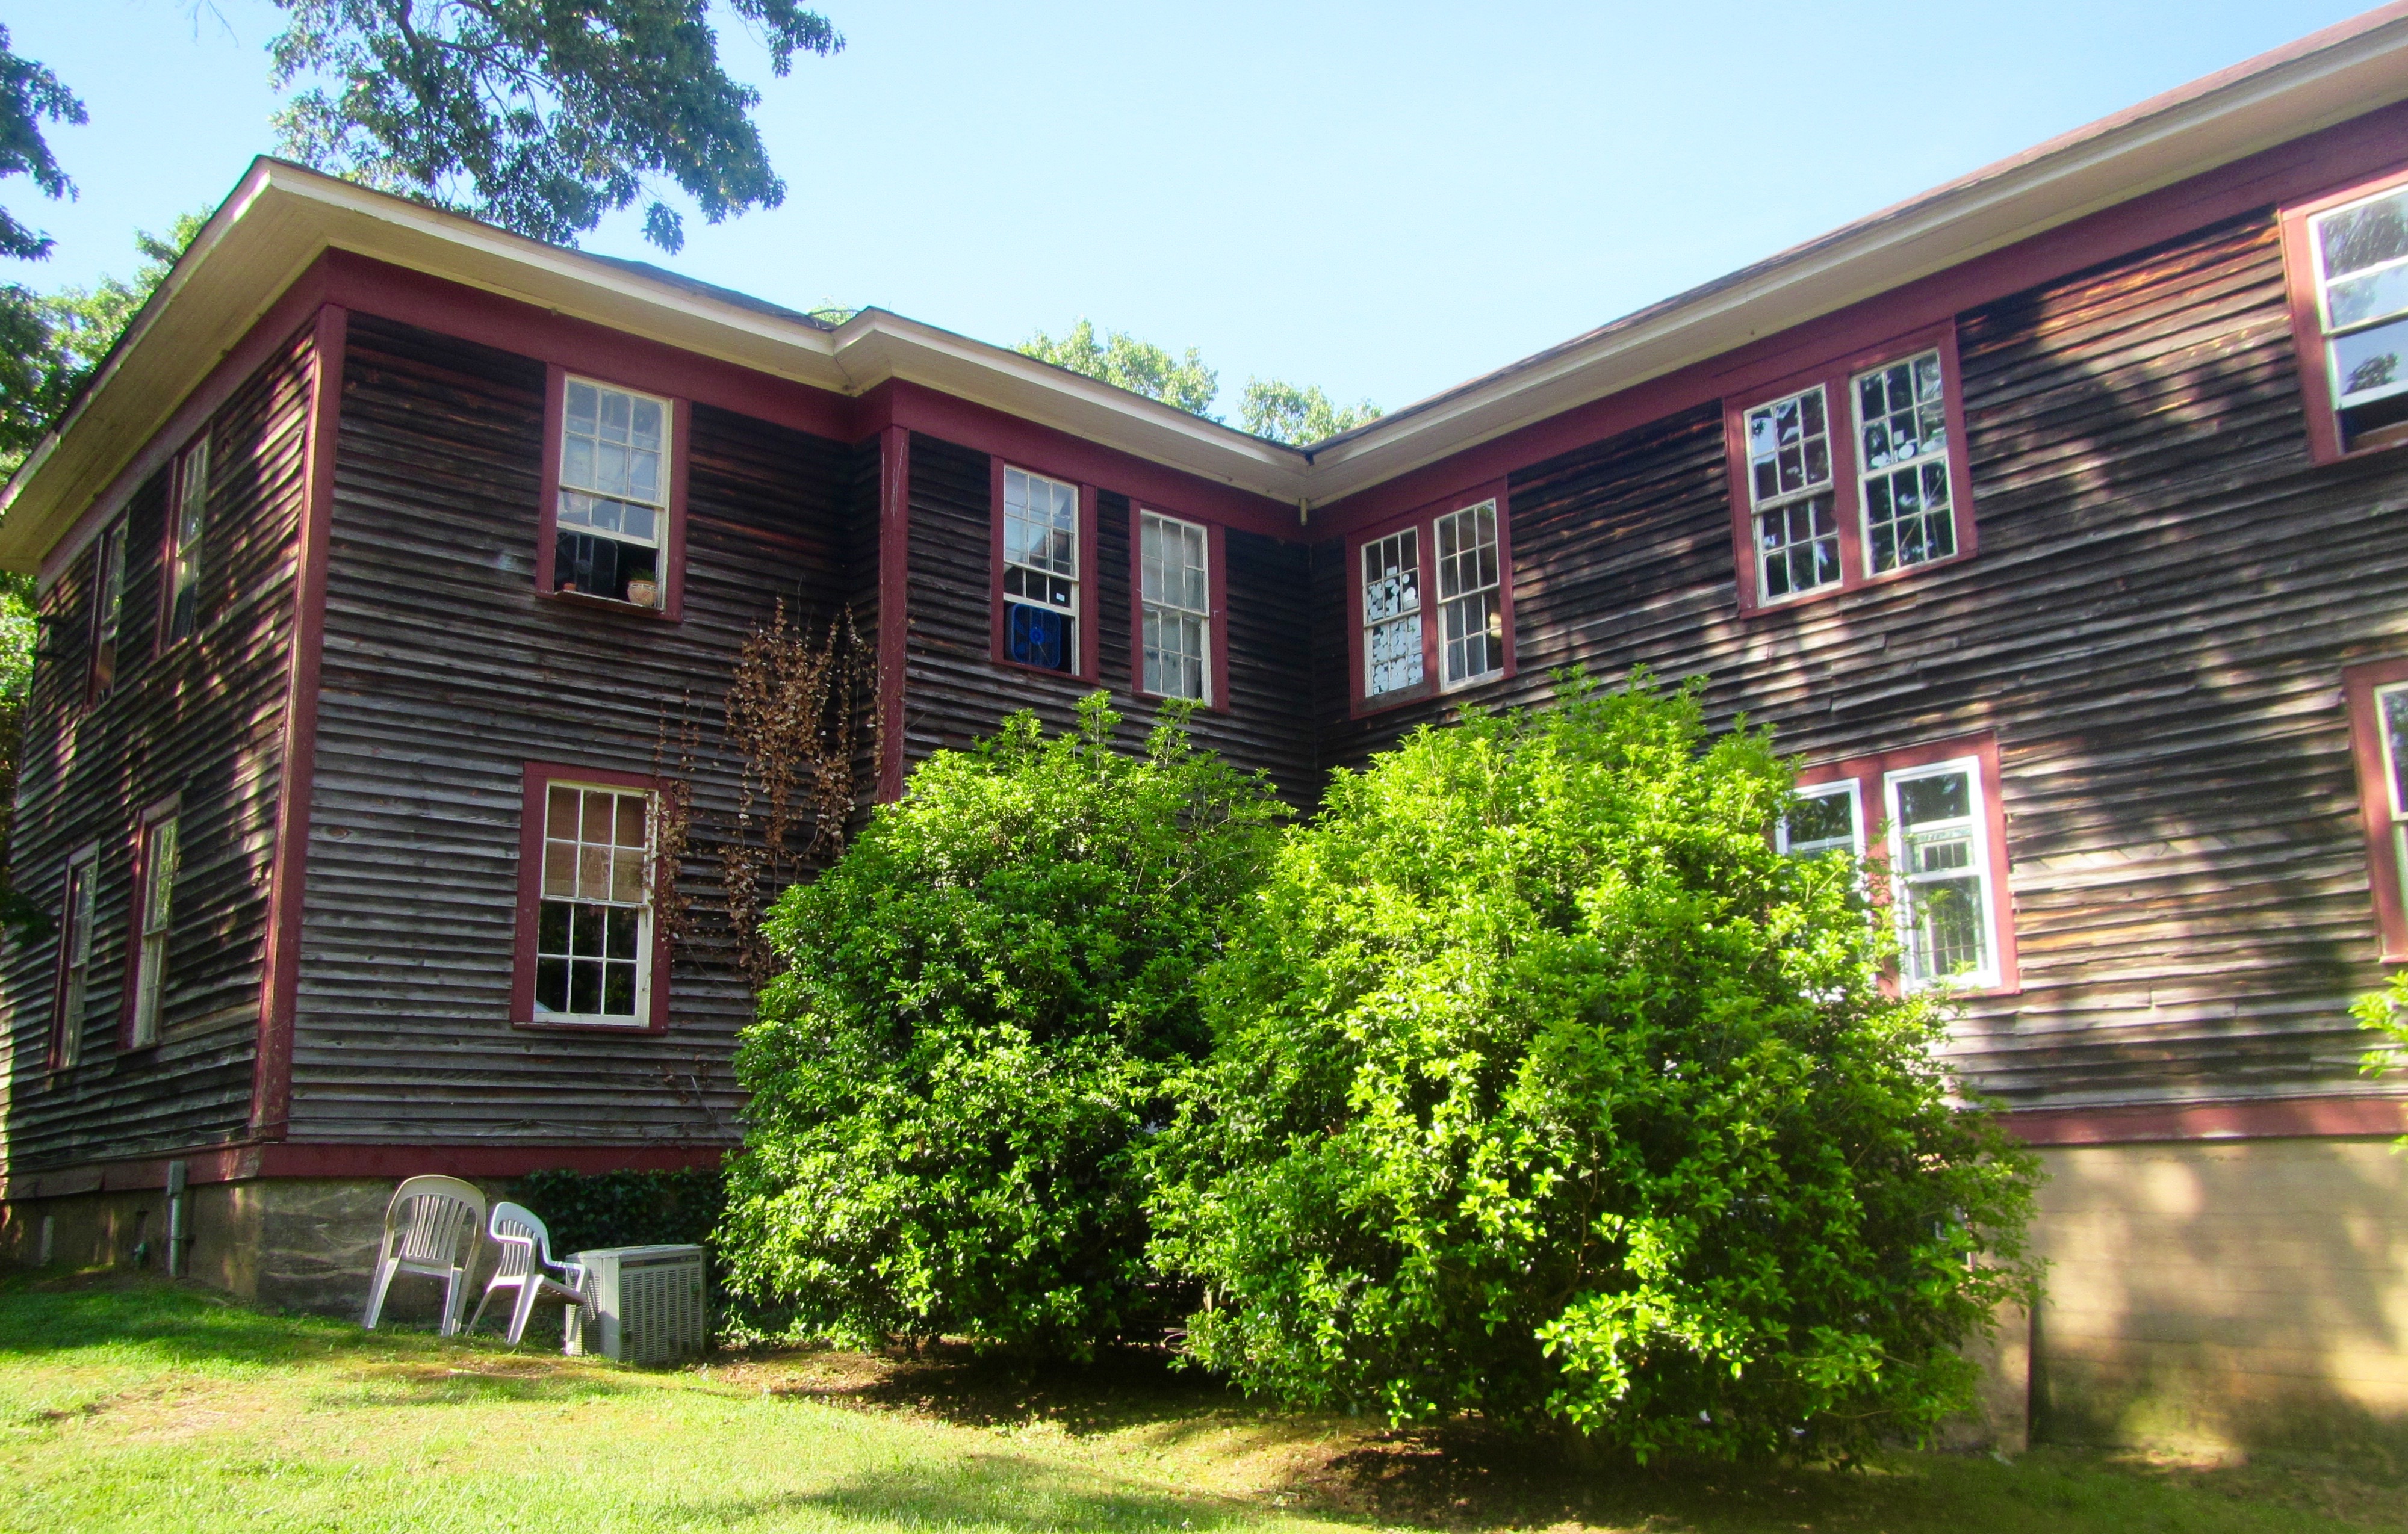 The Old Girl's Dorm, Wildwater Rafting